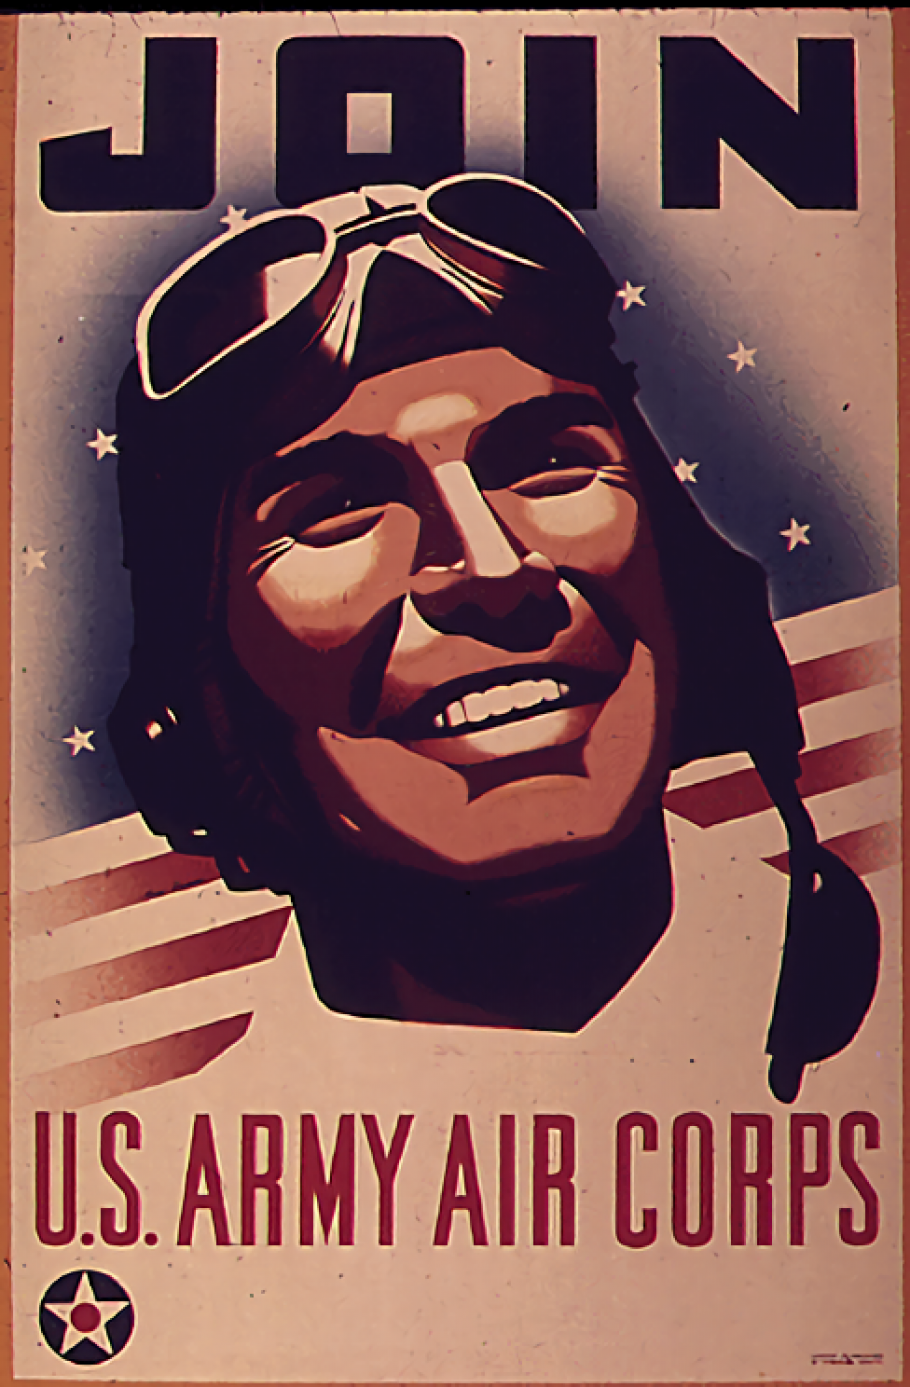 World War II poster that reads "U.S. Army Air Corps"